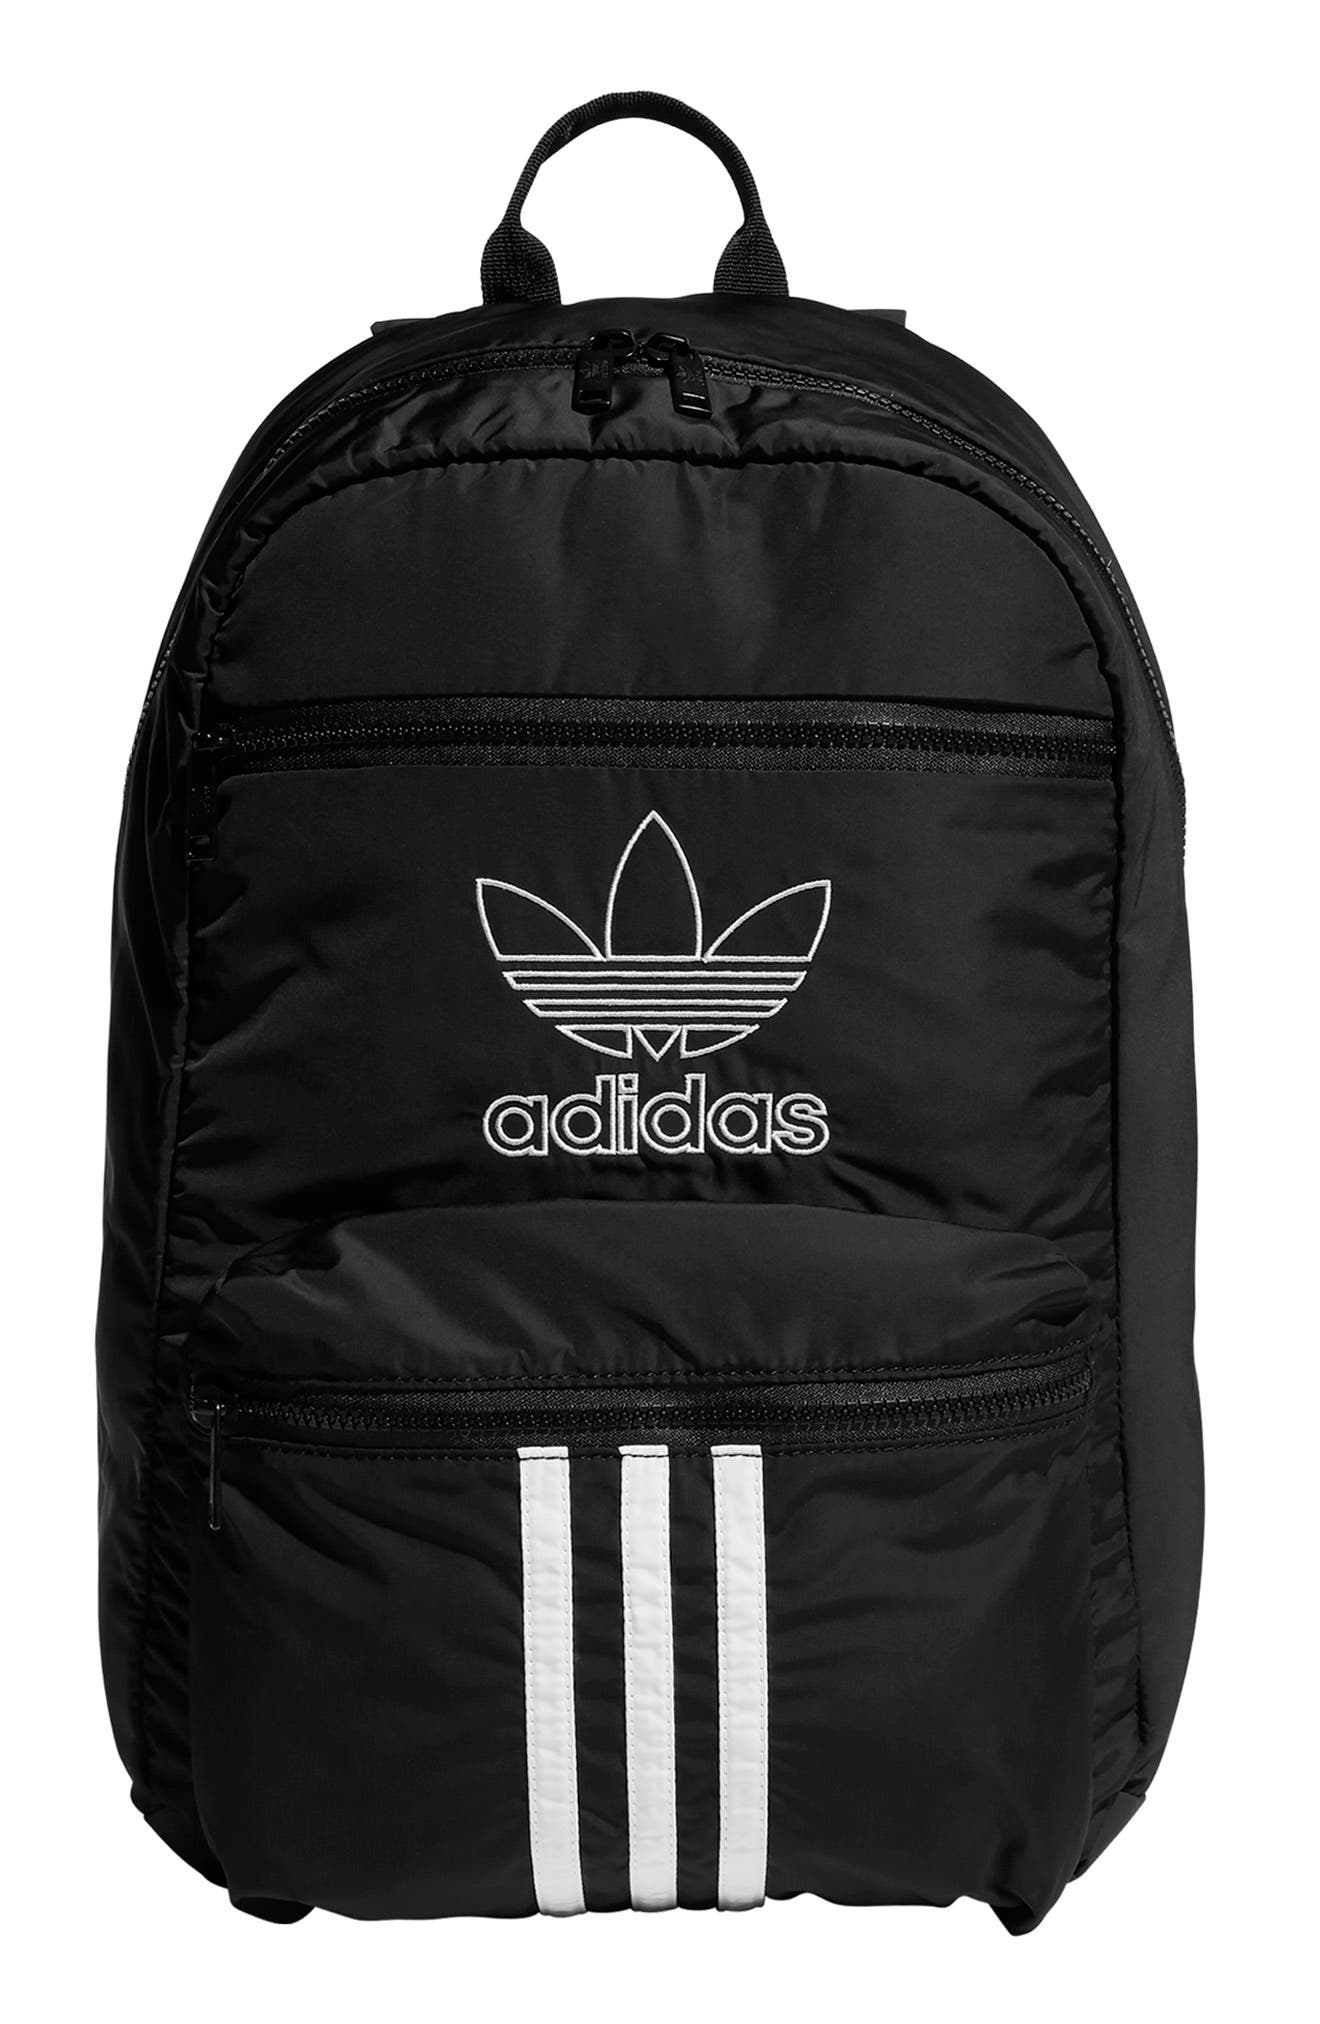 men's adidas bags for sale